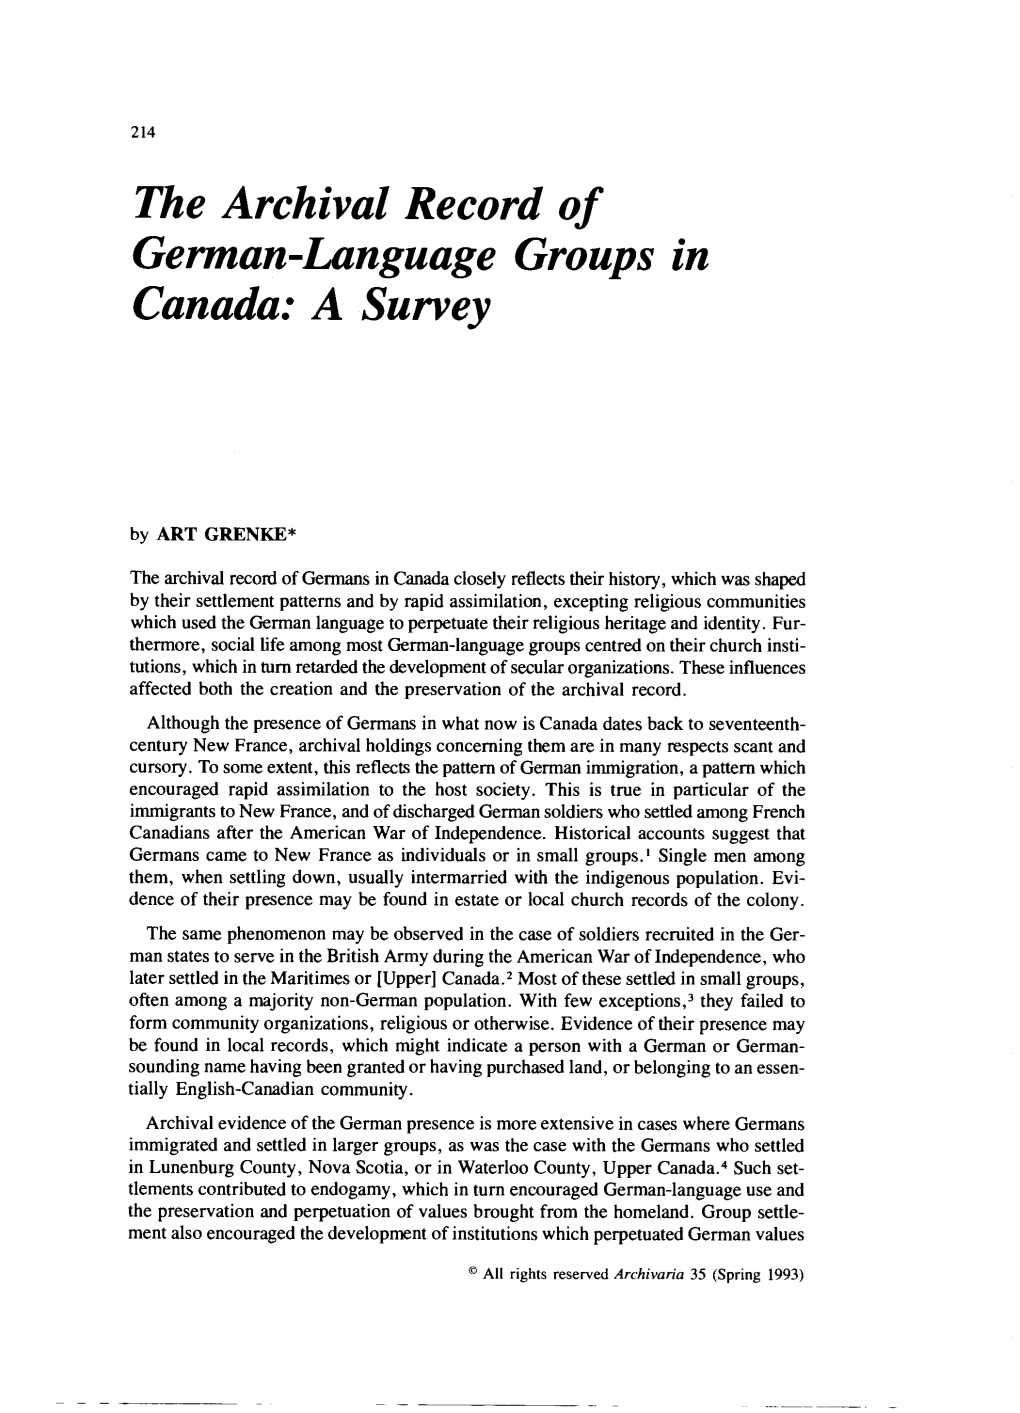 The Archival Record of German-Language Groups in Canada: a Survey